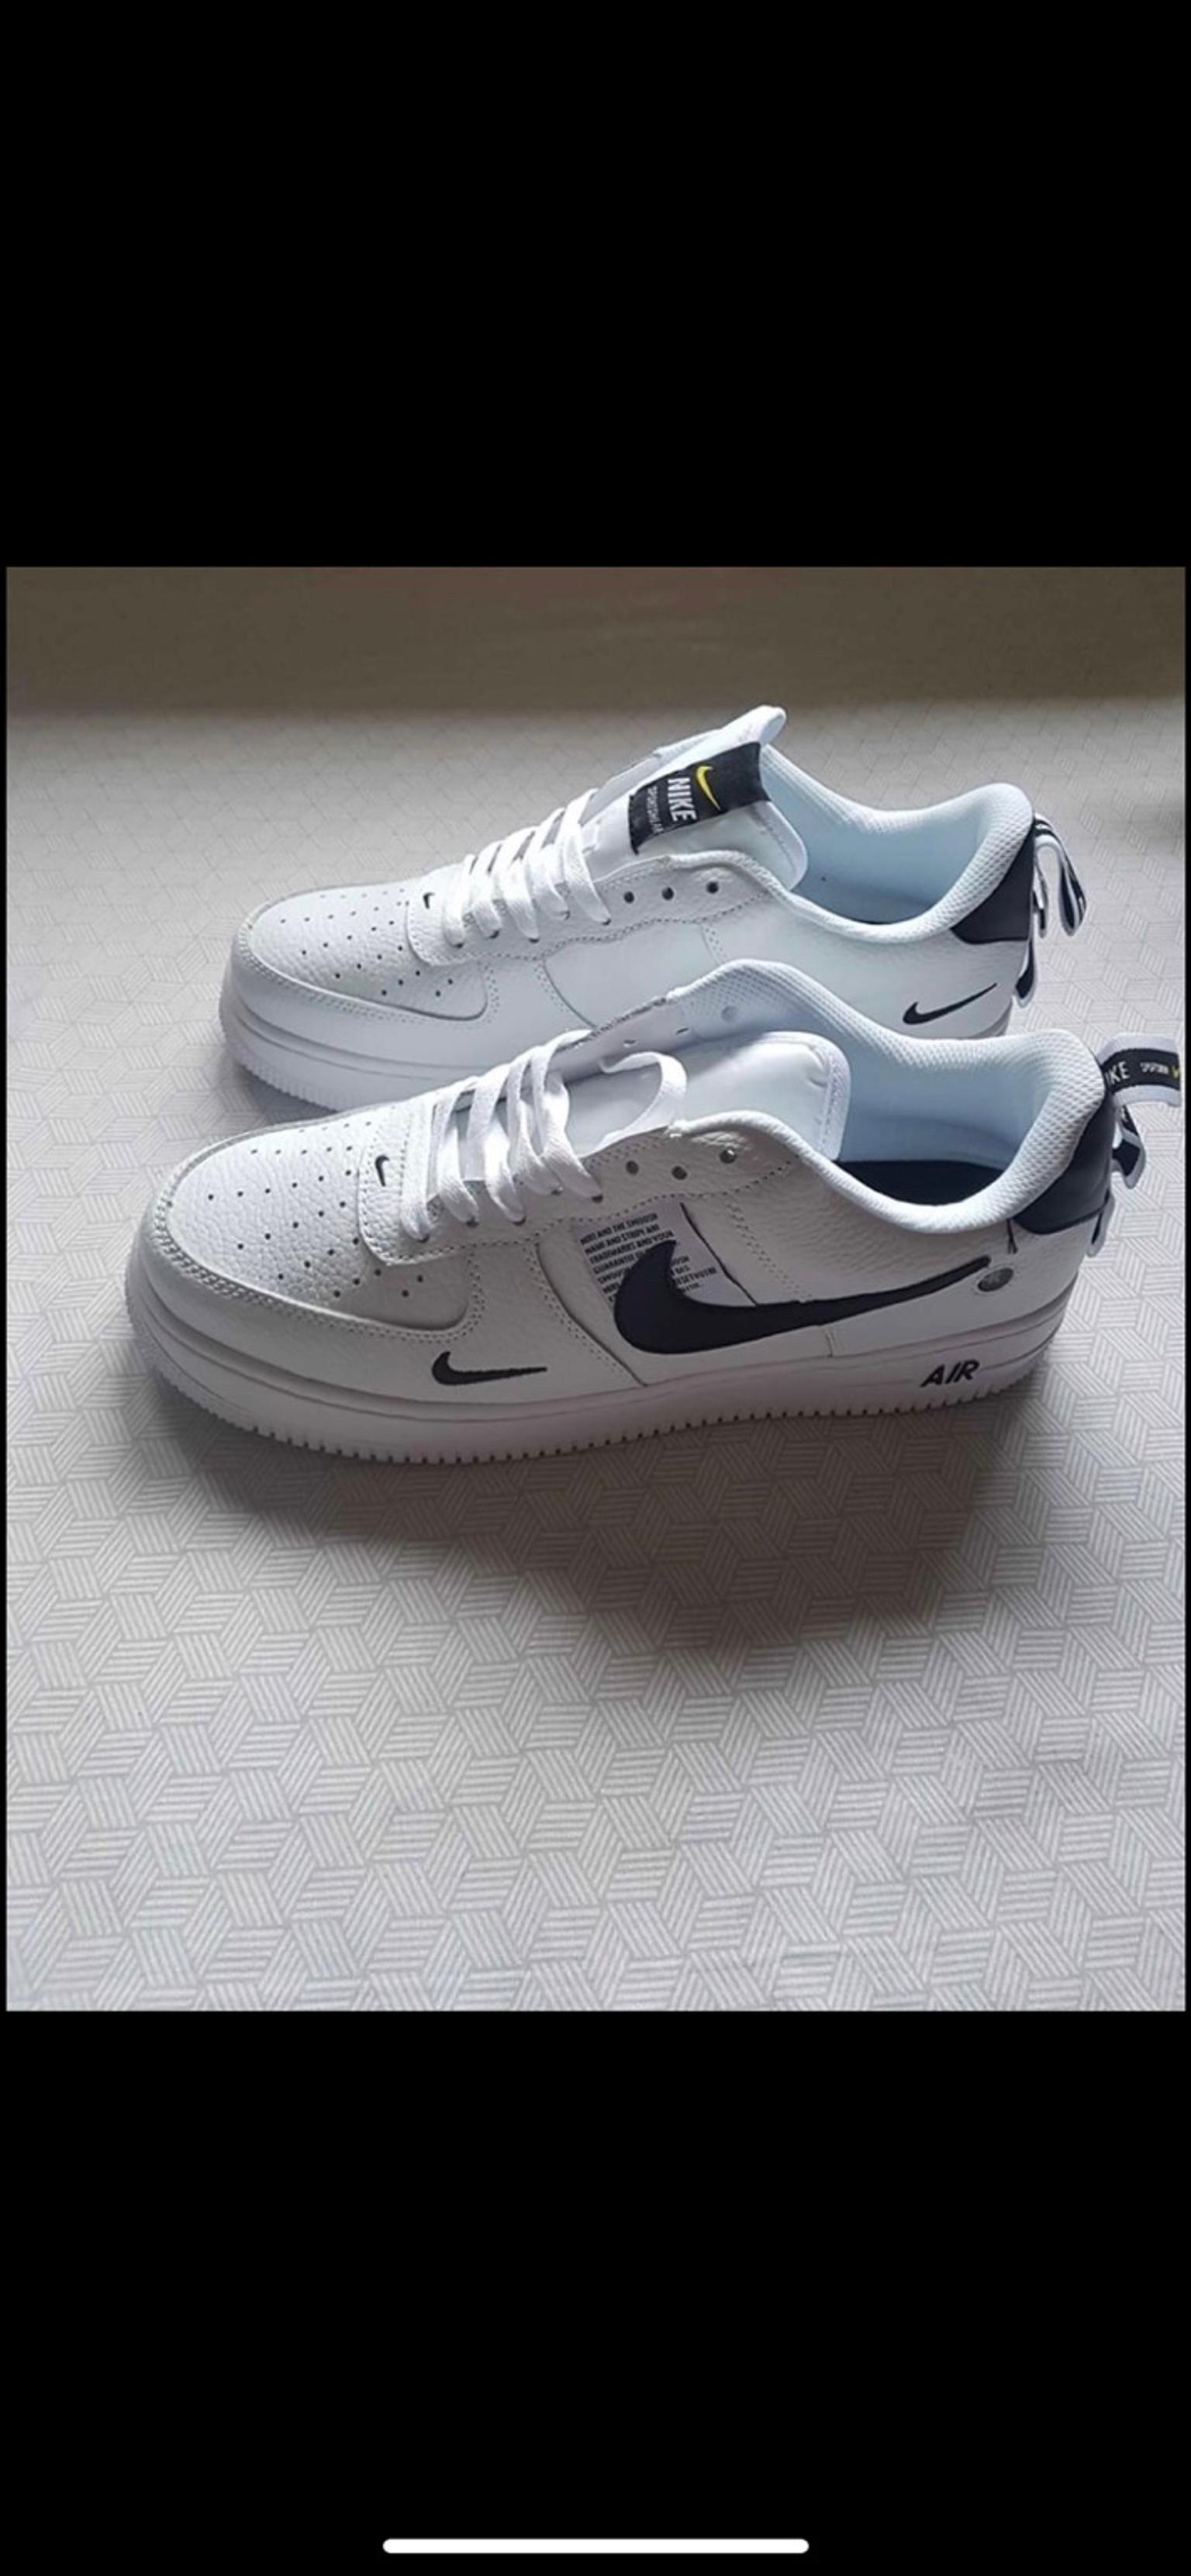 Nike Air Force in 21227 Malmo for SEK 950.00 for sale | Shpock